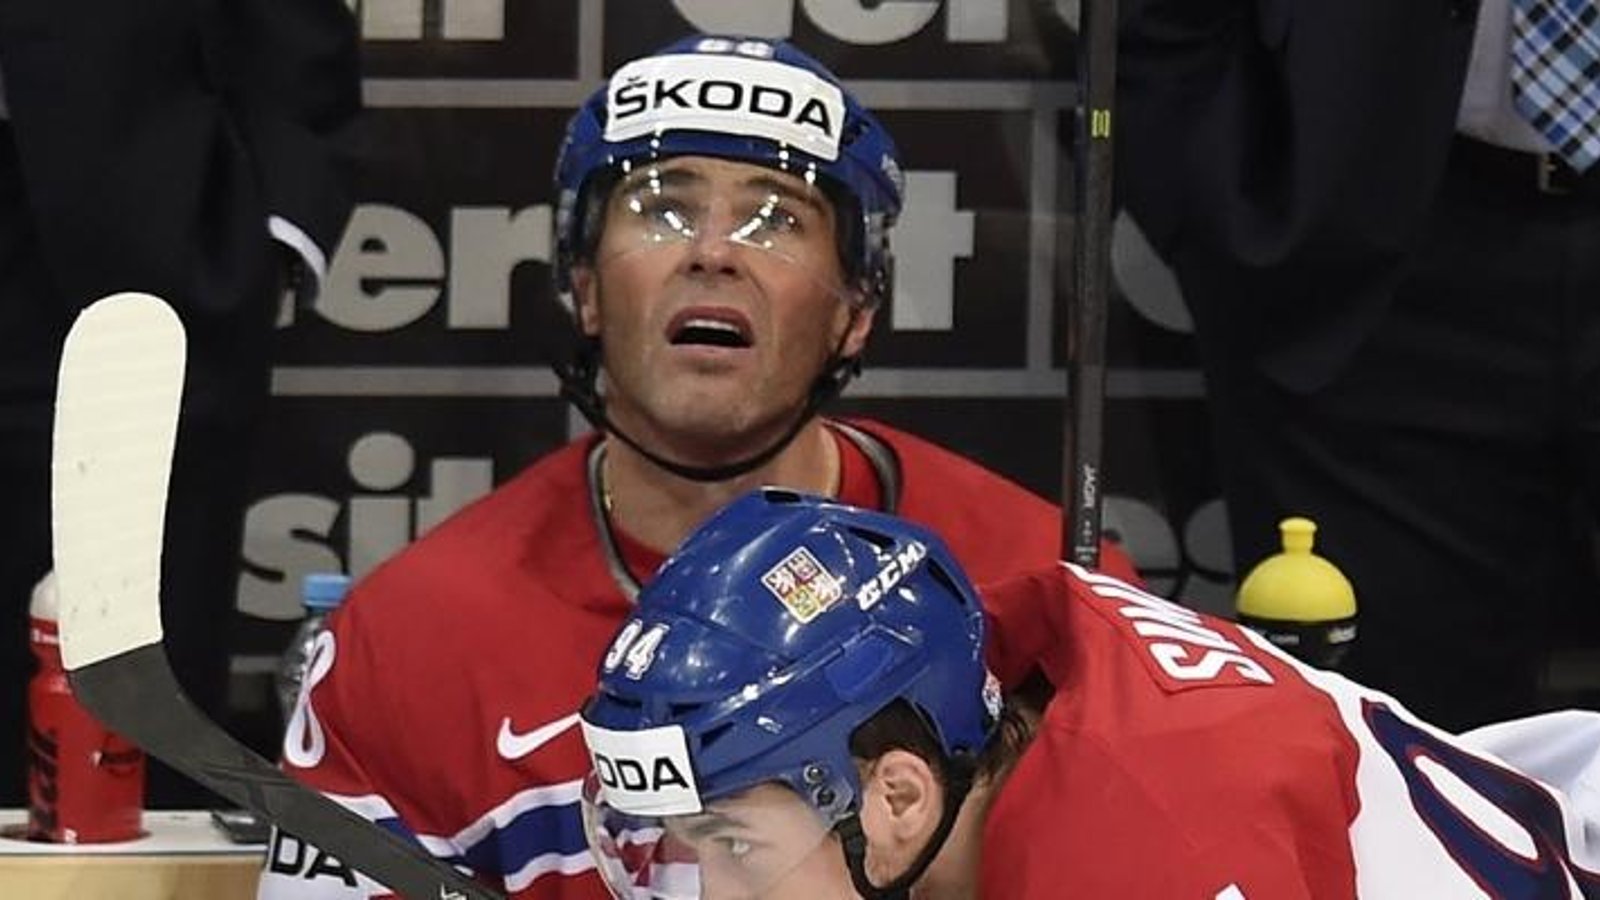 NHL Legend is left off his country's World Cup roster.